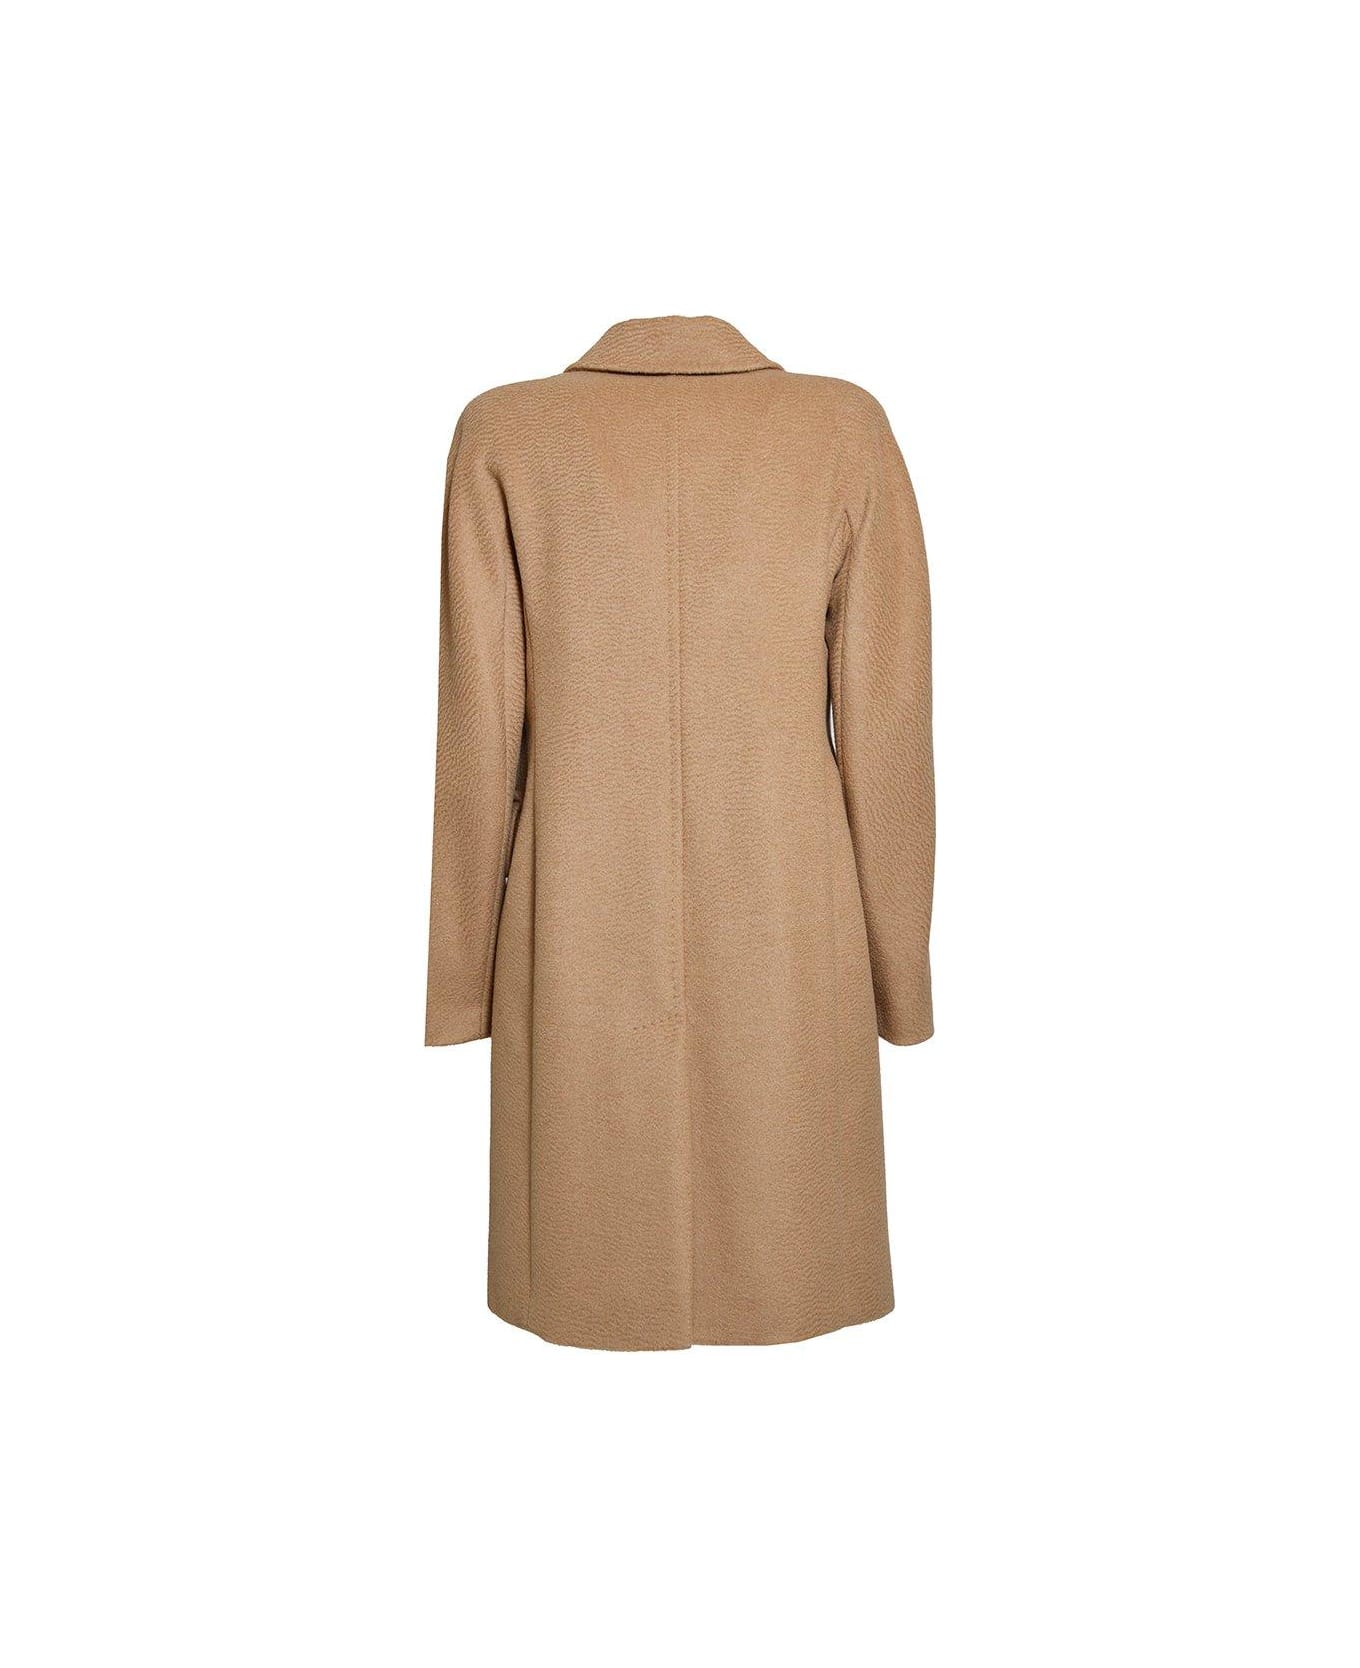 Max Mara Belted Long-sleeved Coat - Cammello